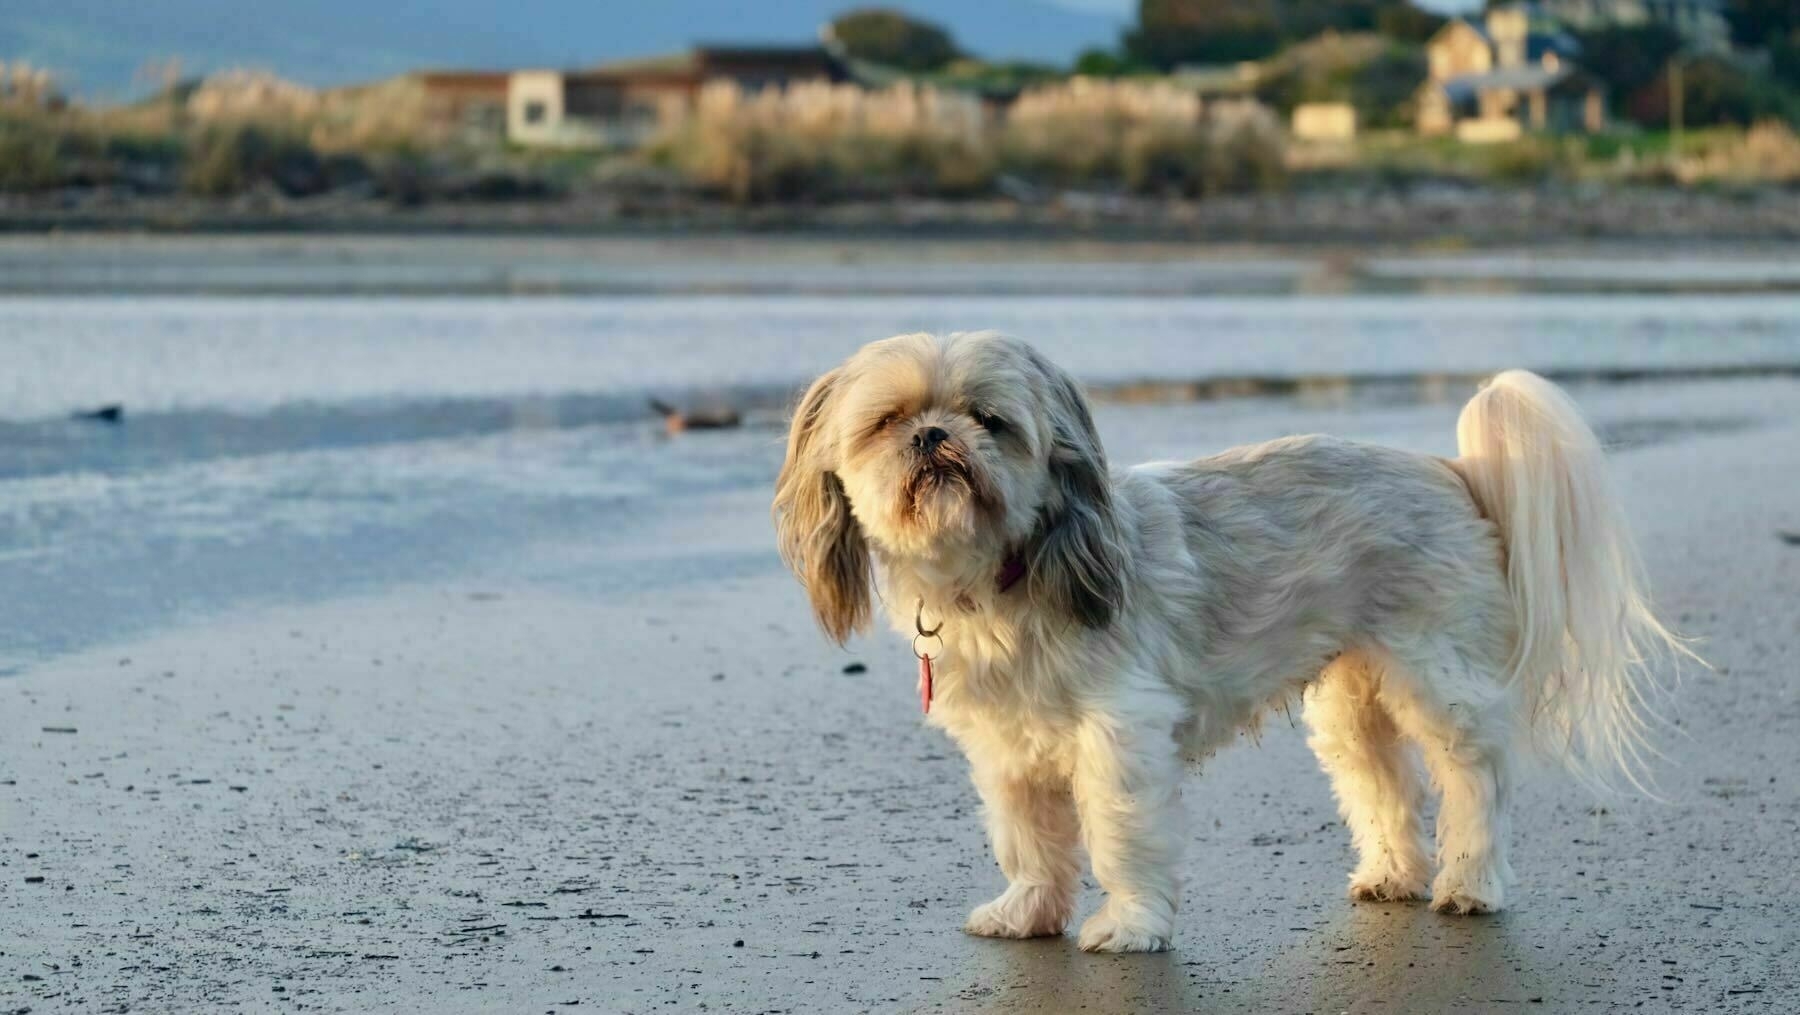 Oshi 11 May 2018. He enjoyed the beach but wouldn't go in the water. 